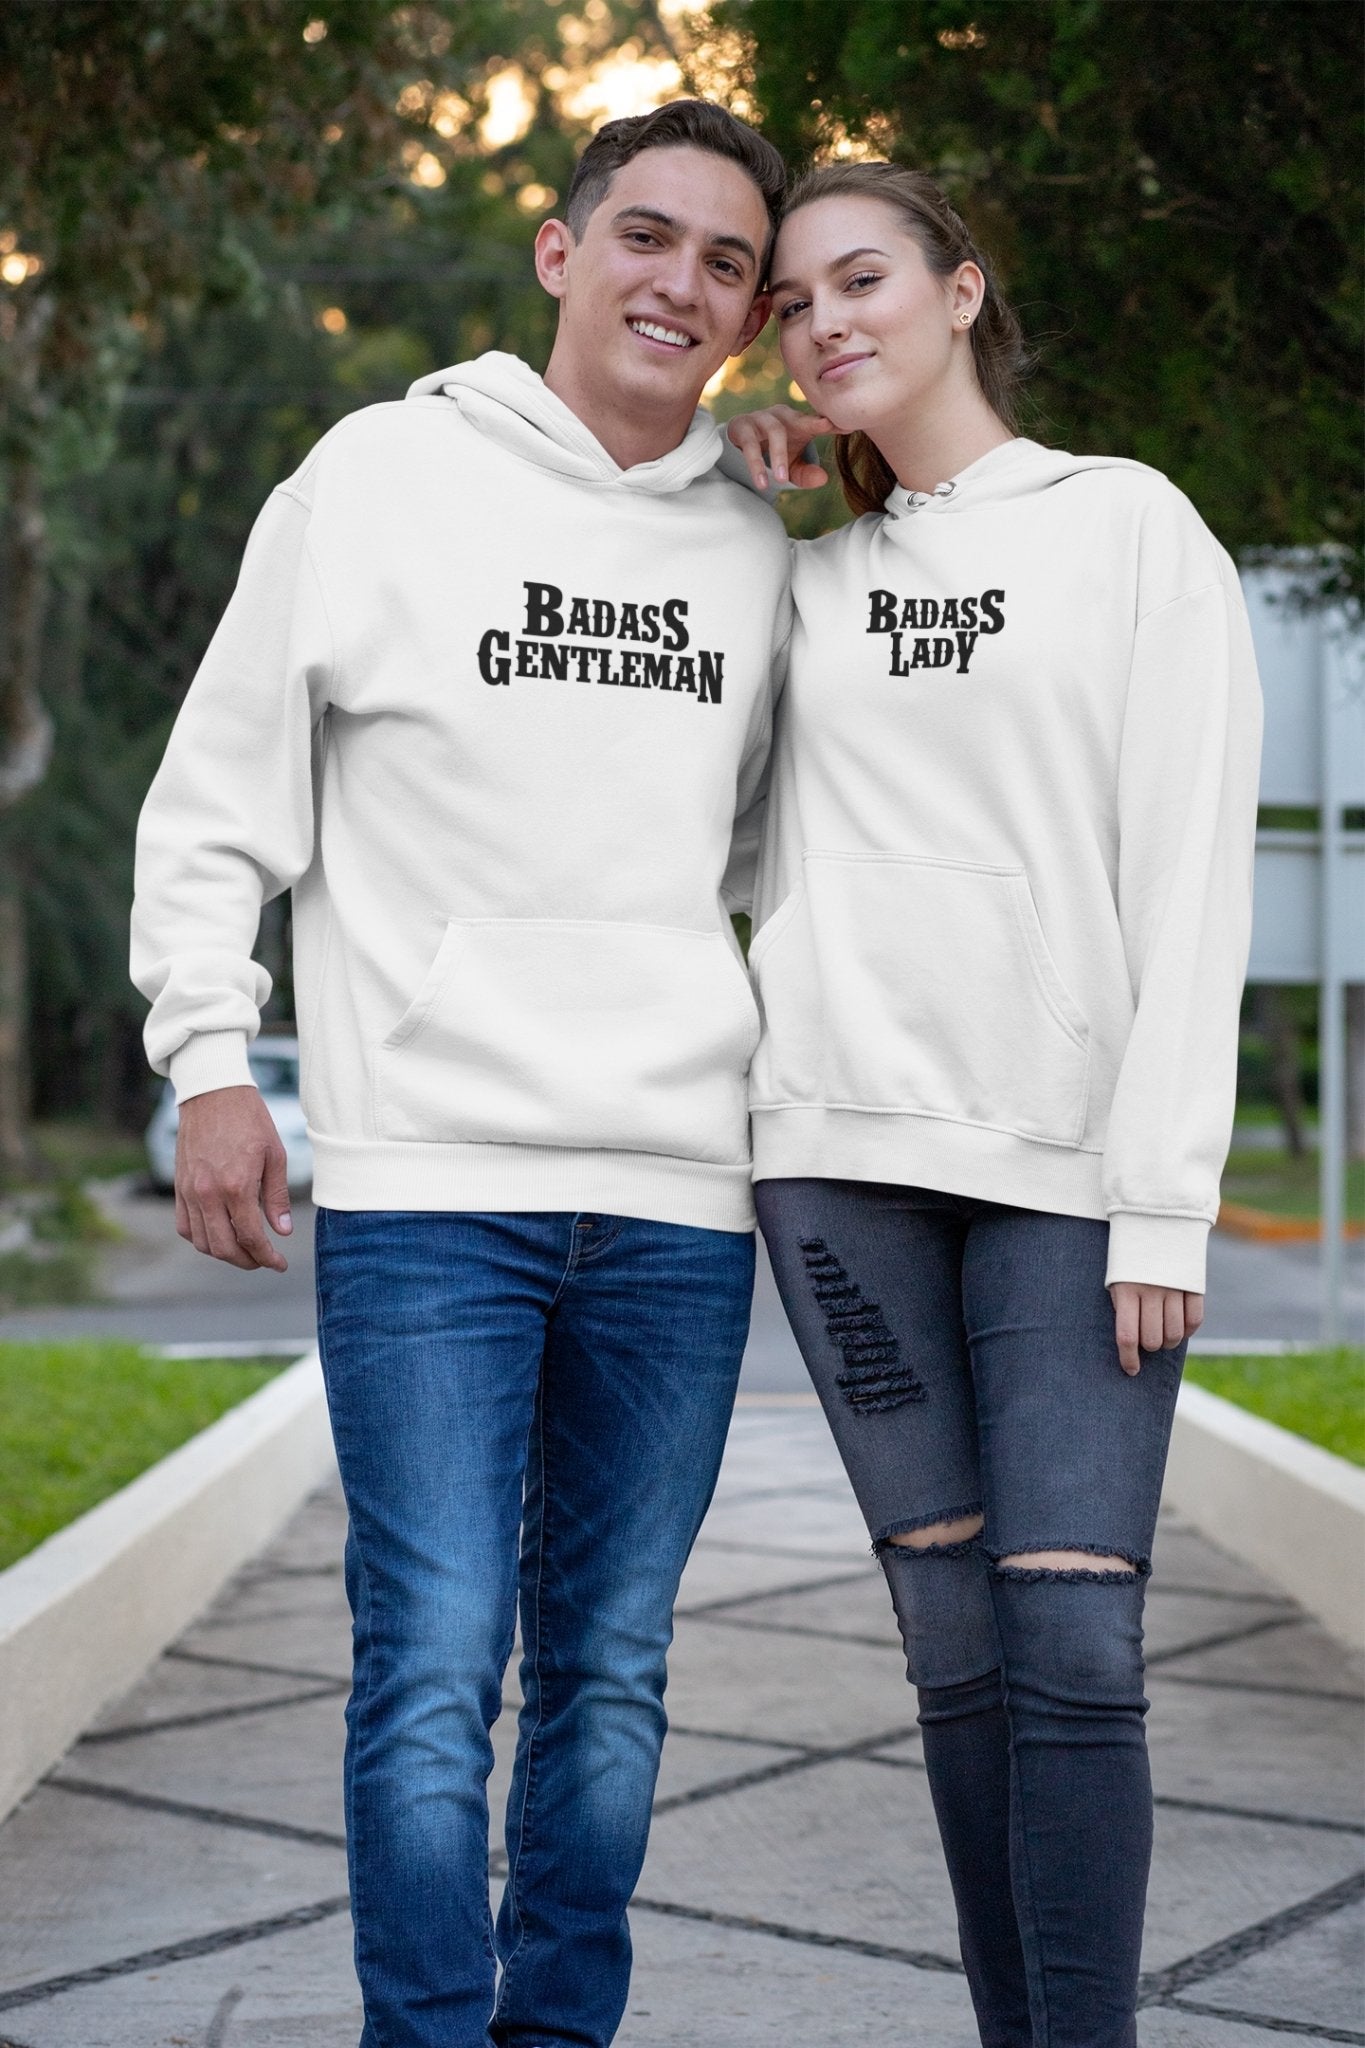 Gentleman Lady Couple Hoodie-FunkyTradition - FunkyTradition